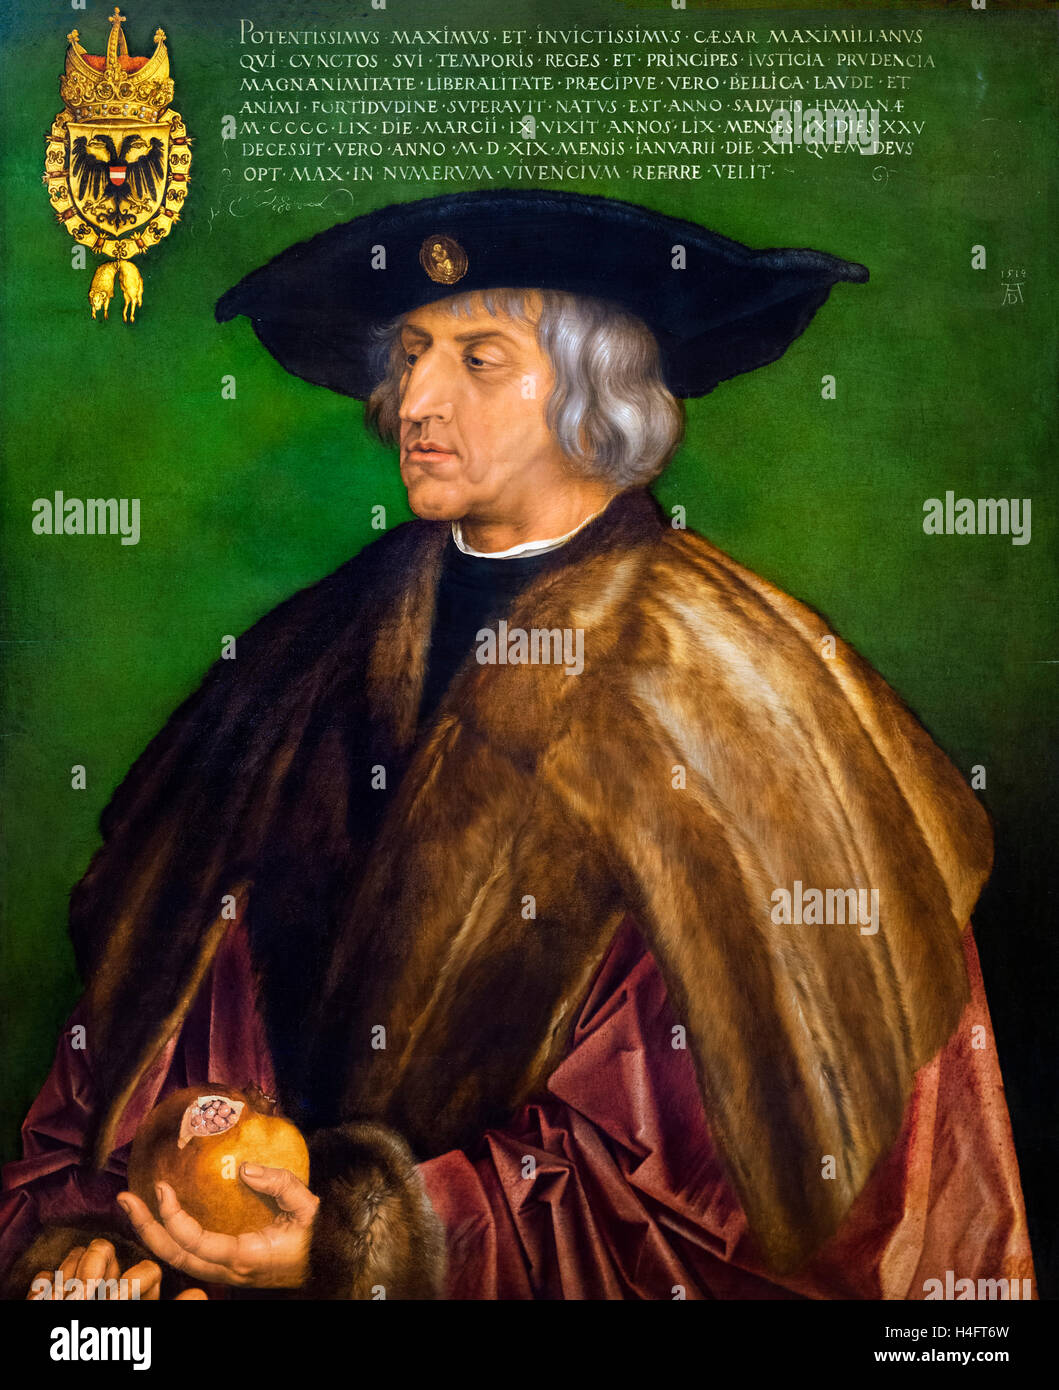 Maximilian I (1459-1519), King of the Romans (also known as King of the Germans) from 1486 and Holy Roman Emperor from 1493 until his death. Portrait by Albrecht Dürer, oil on wood, 1519. Stock Photo